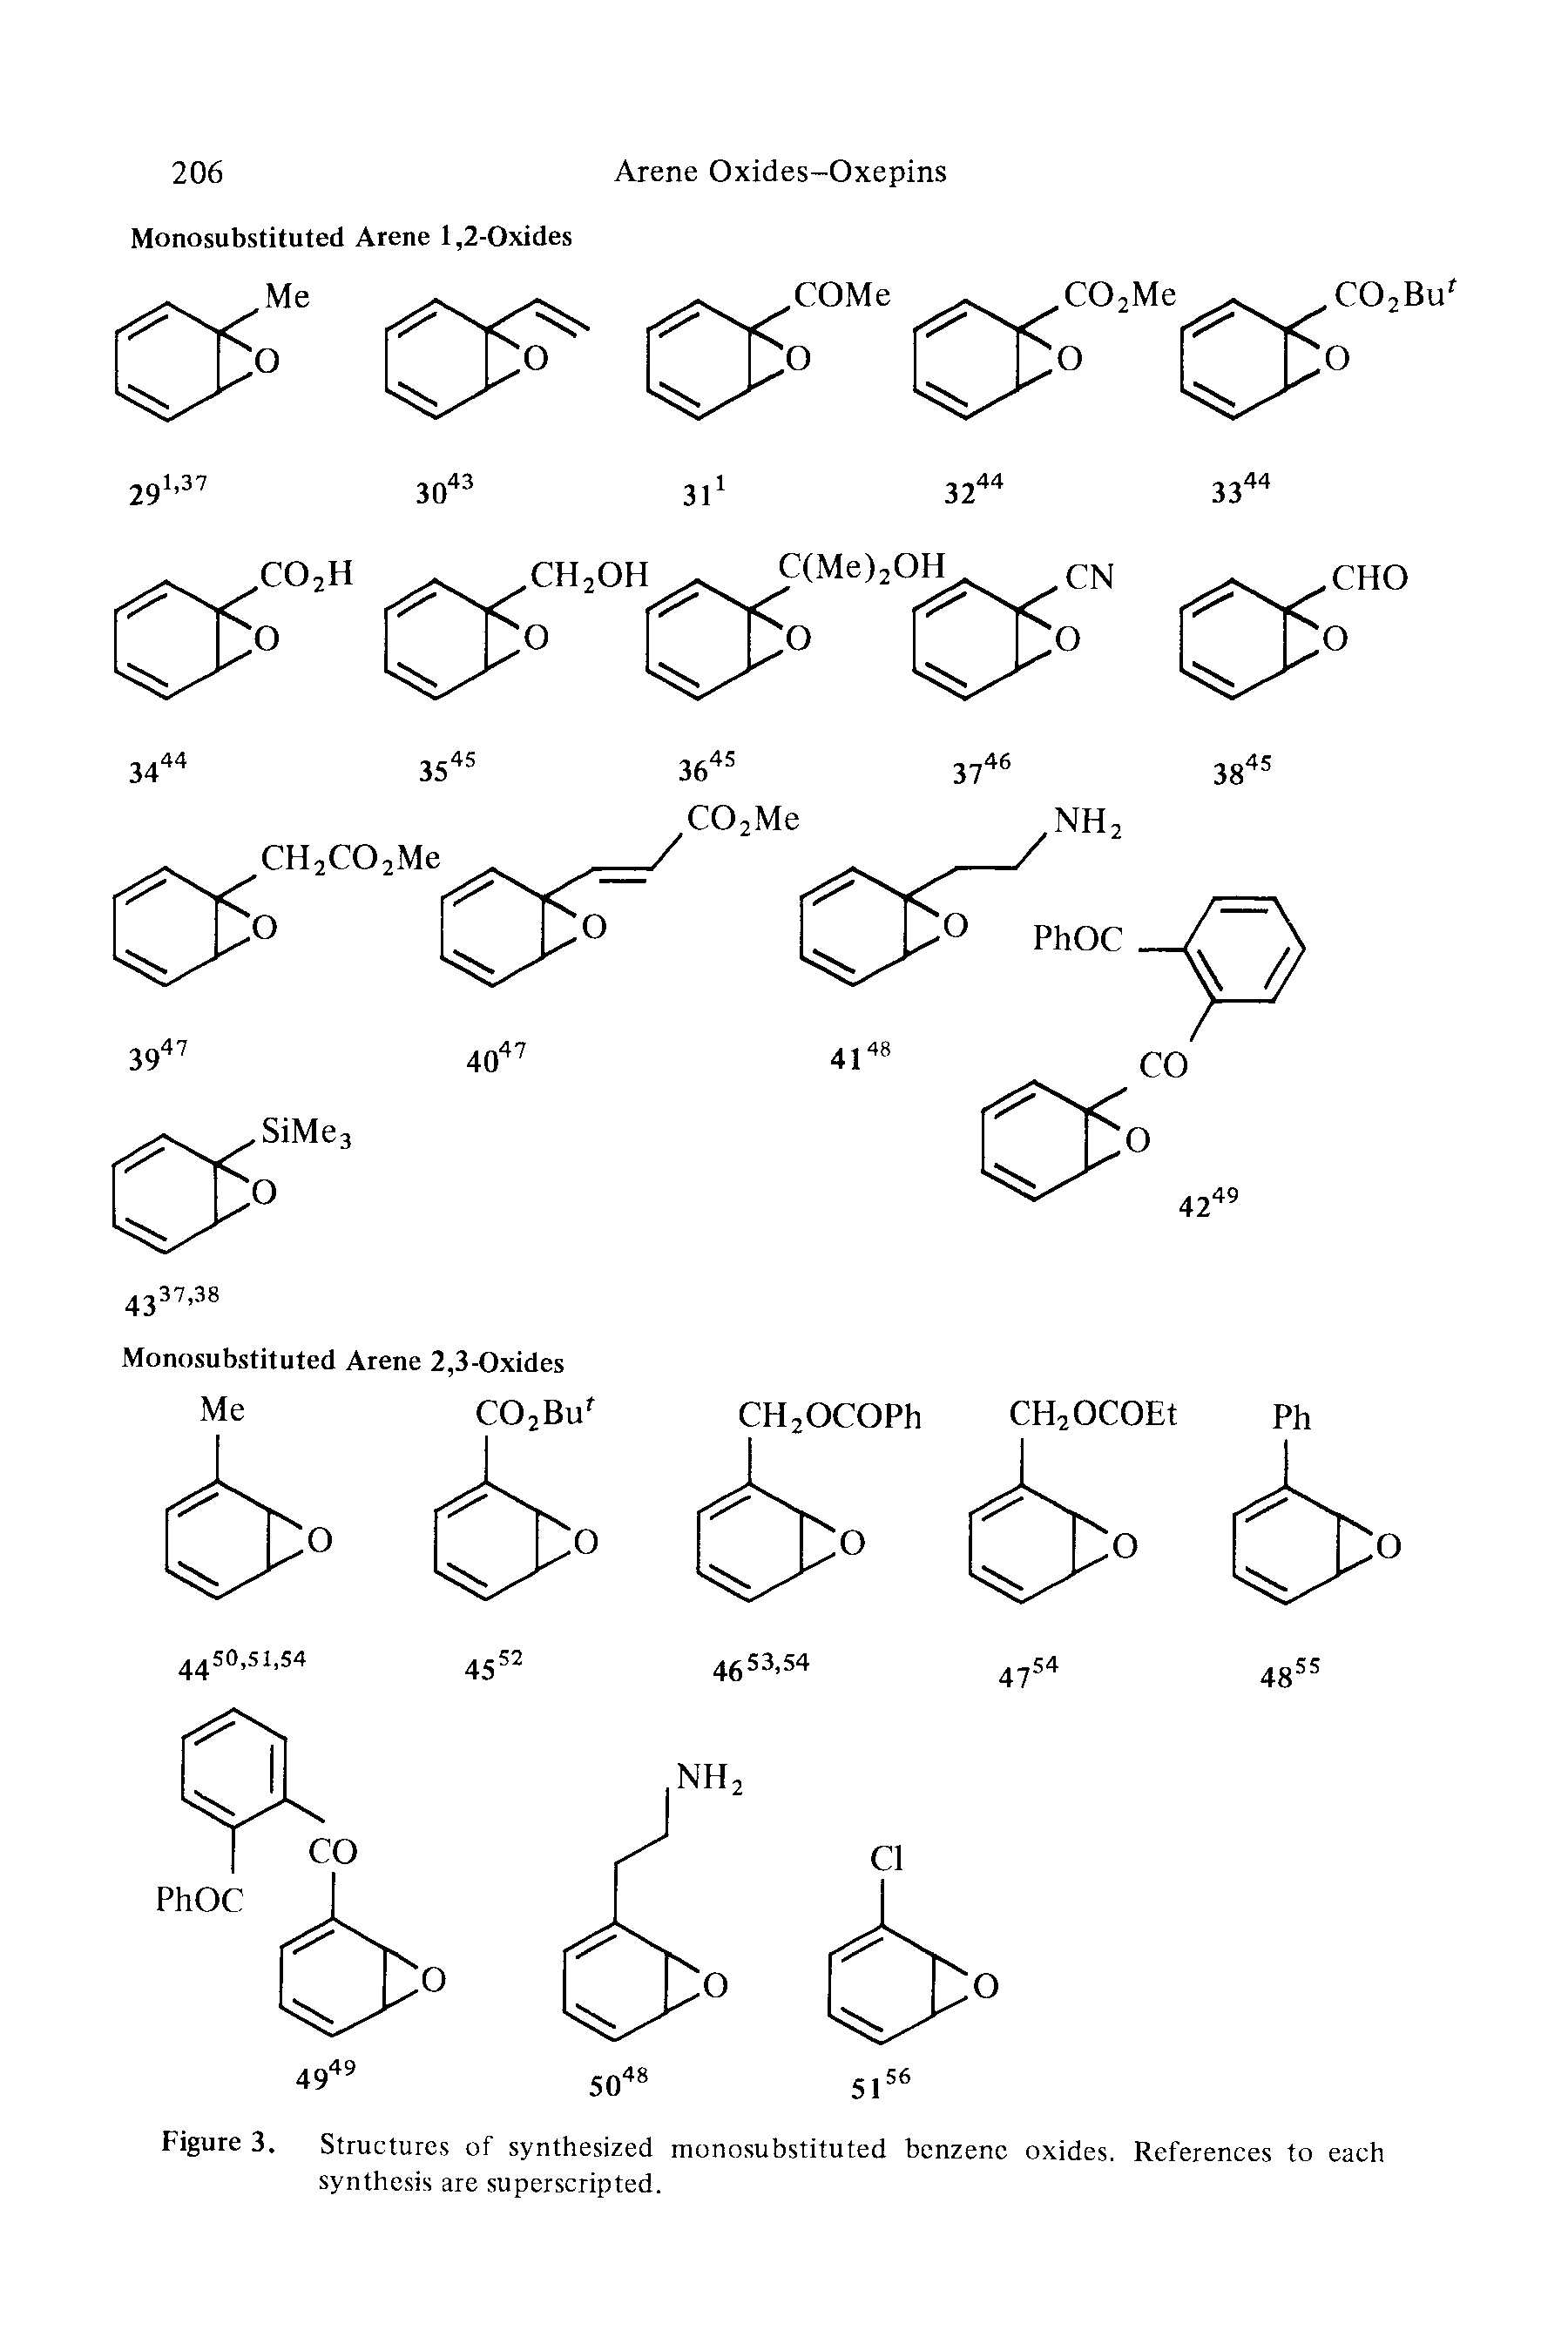 Figure 3. Structures of synthesized monosubstituted benzene oxides. References to each synthesis are superscripted.